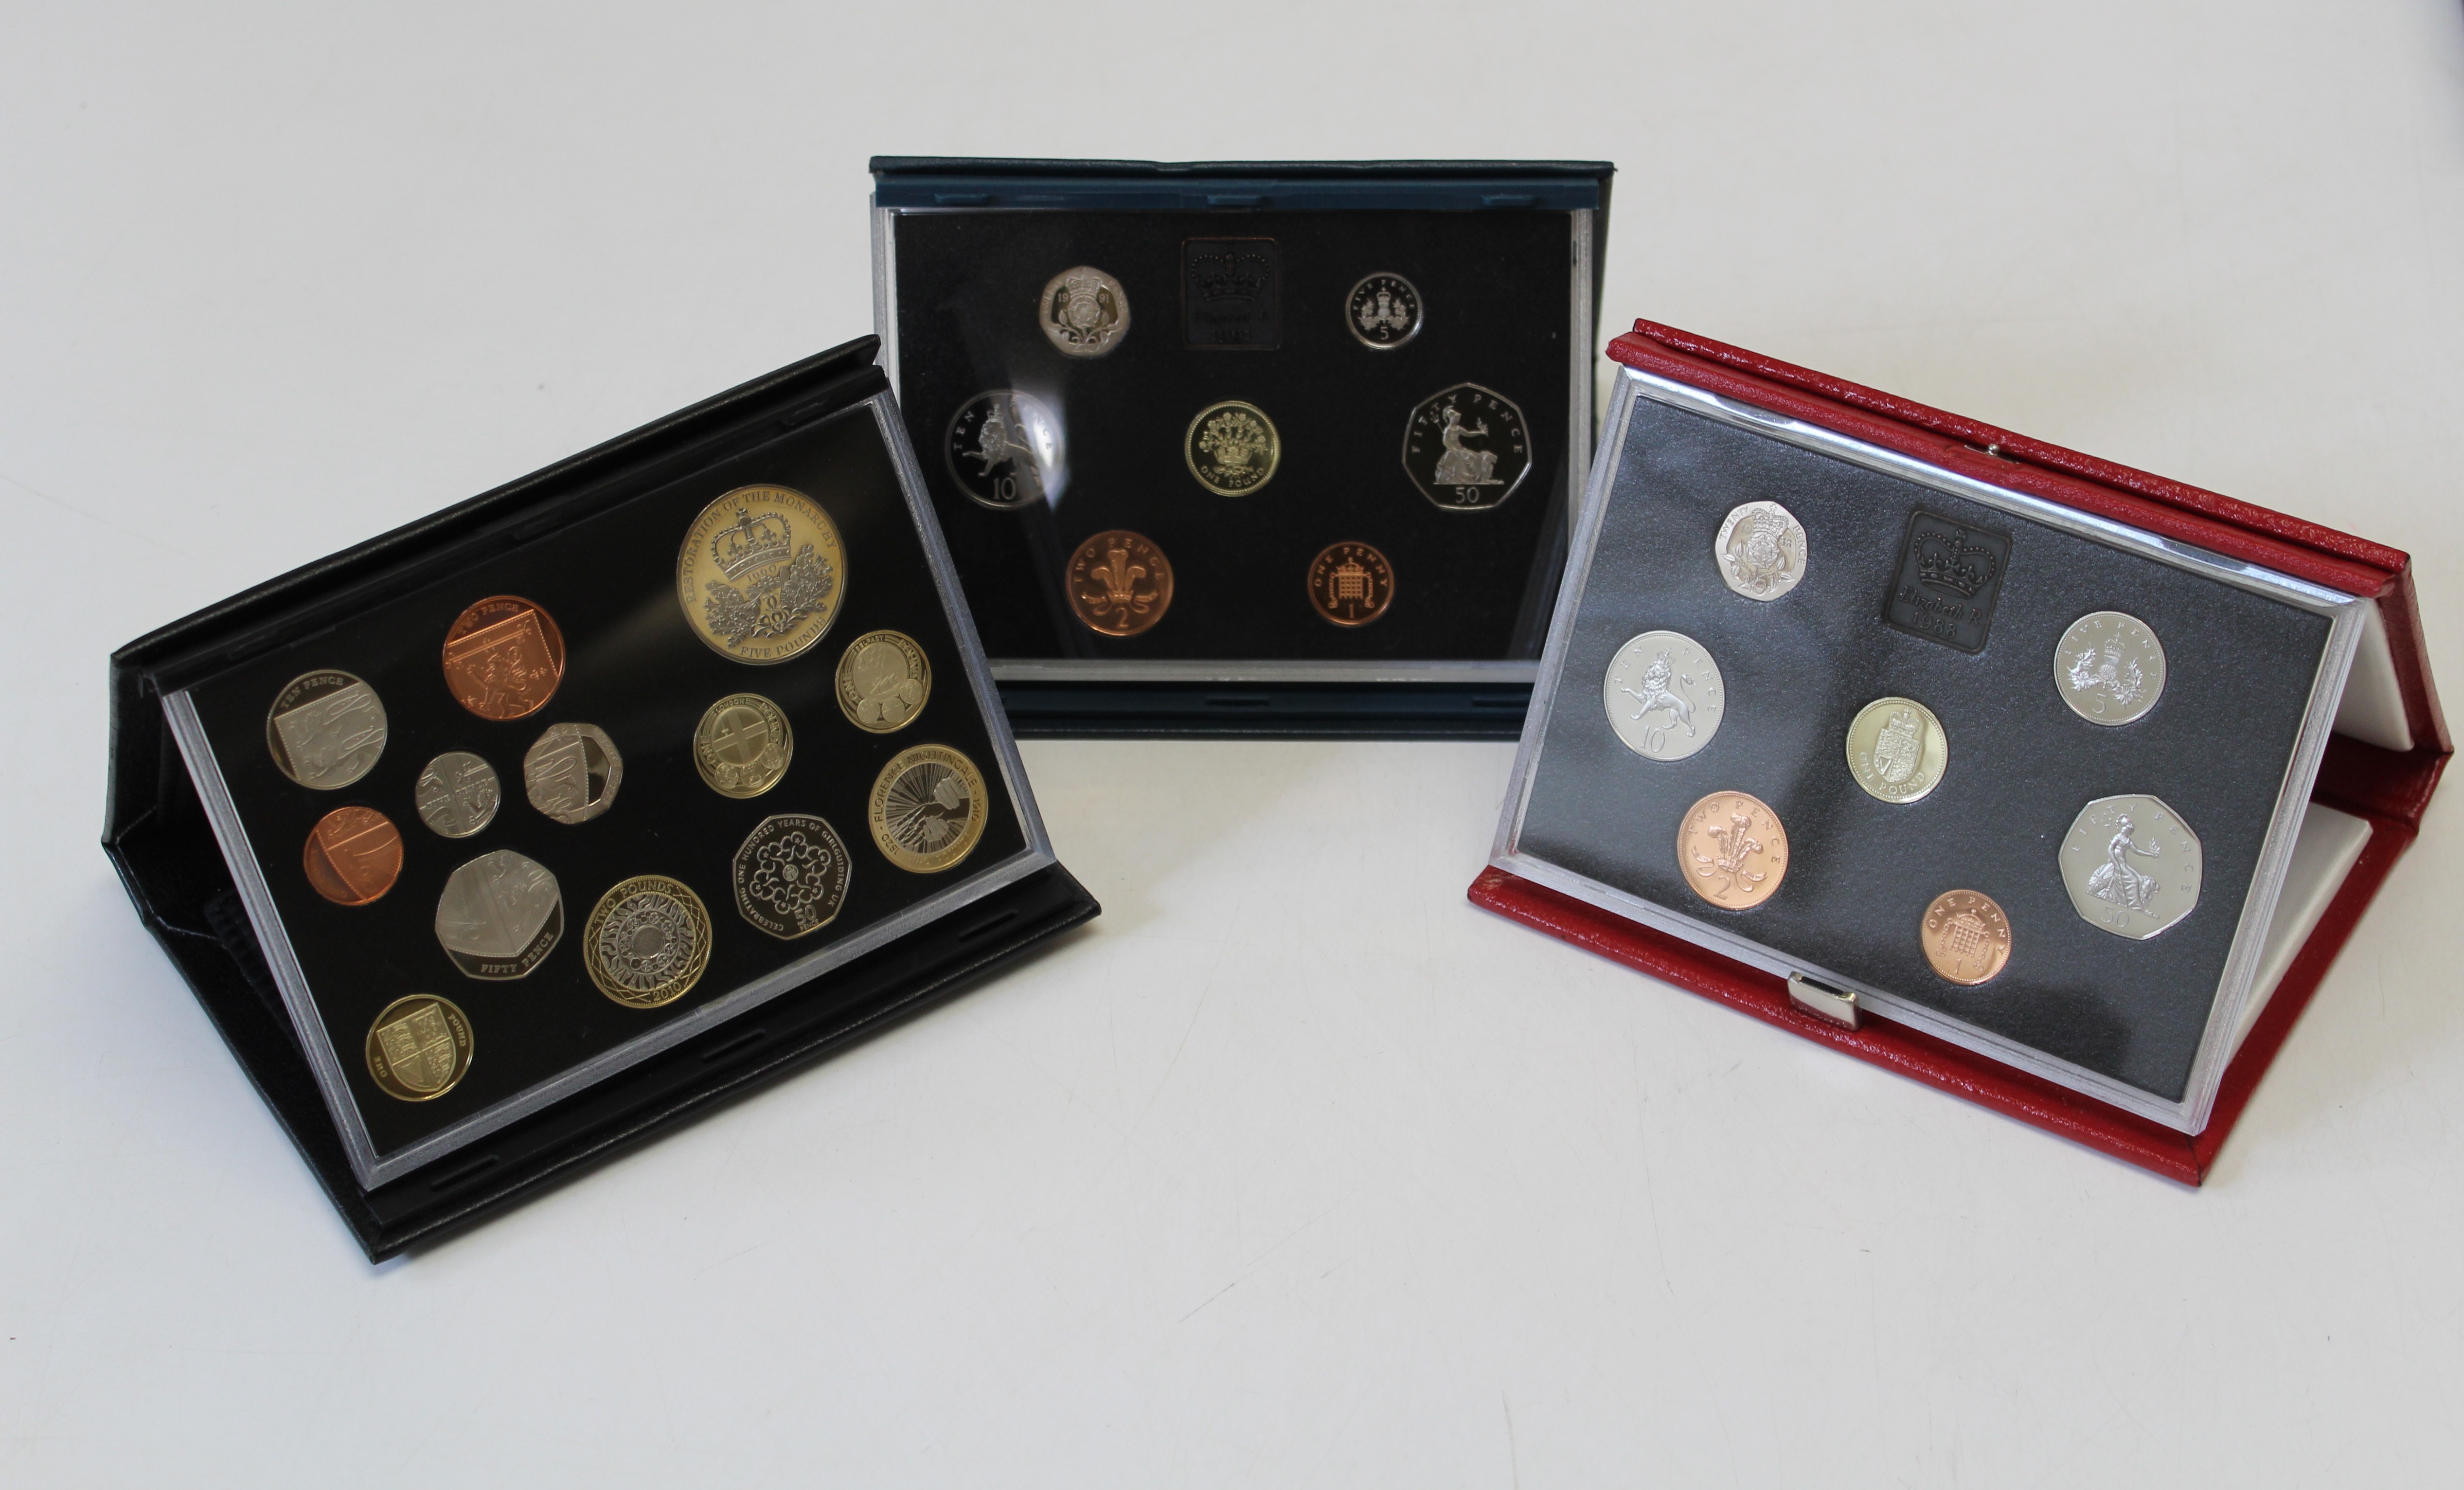 1988 UK proof coin collection set of six in deluxe display box 2010 UK proof coin set of thirteen